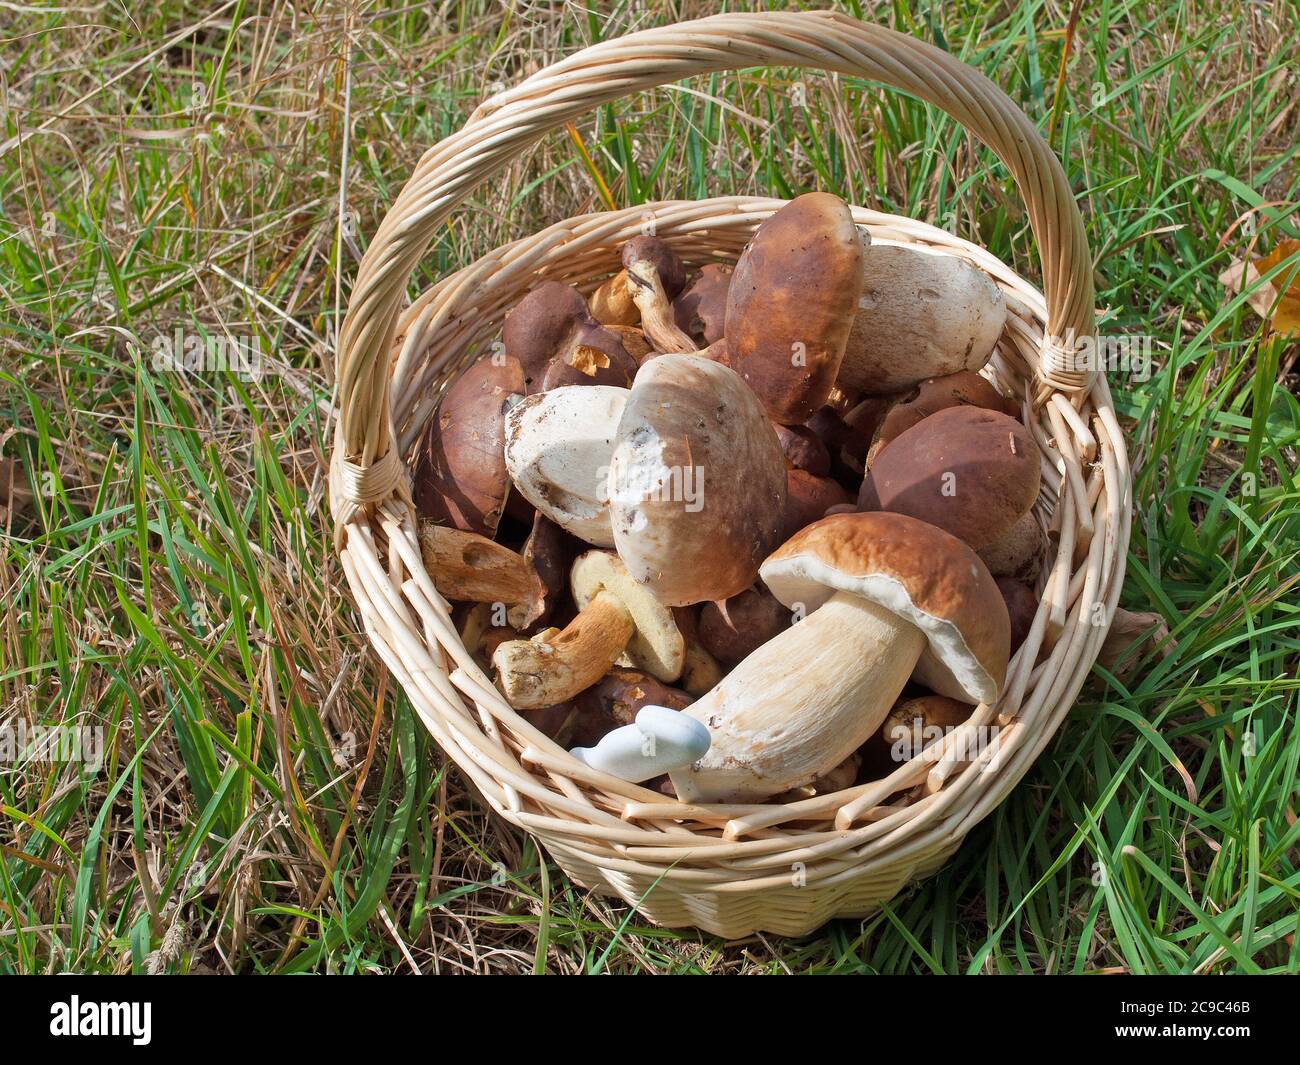 Harvested forest mushrooms in the basket Stock Photo